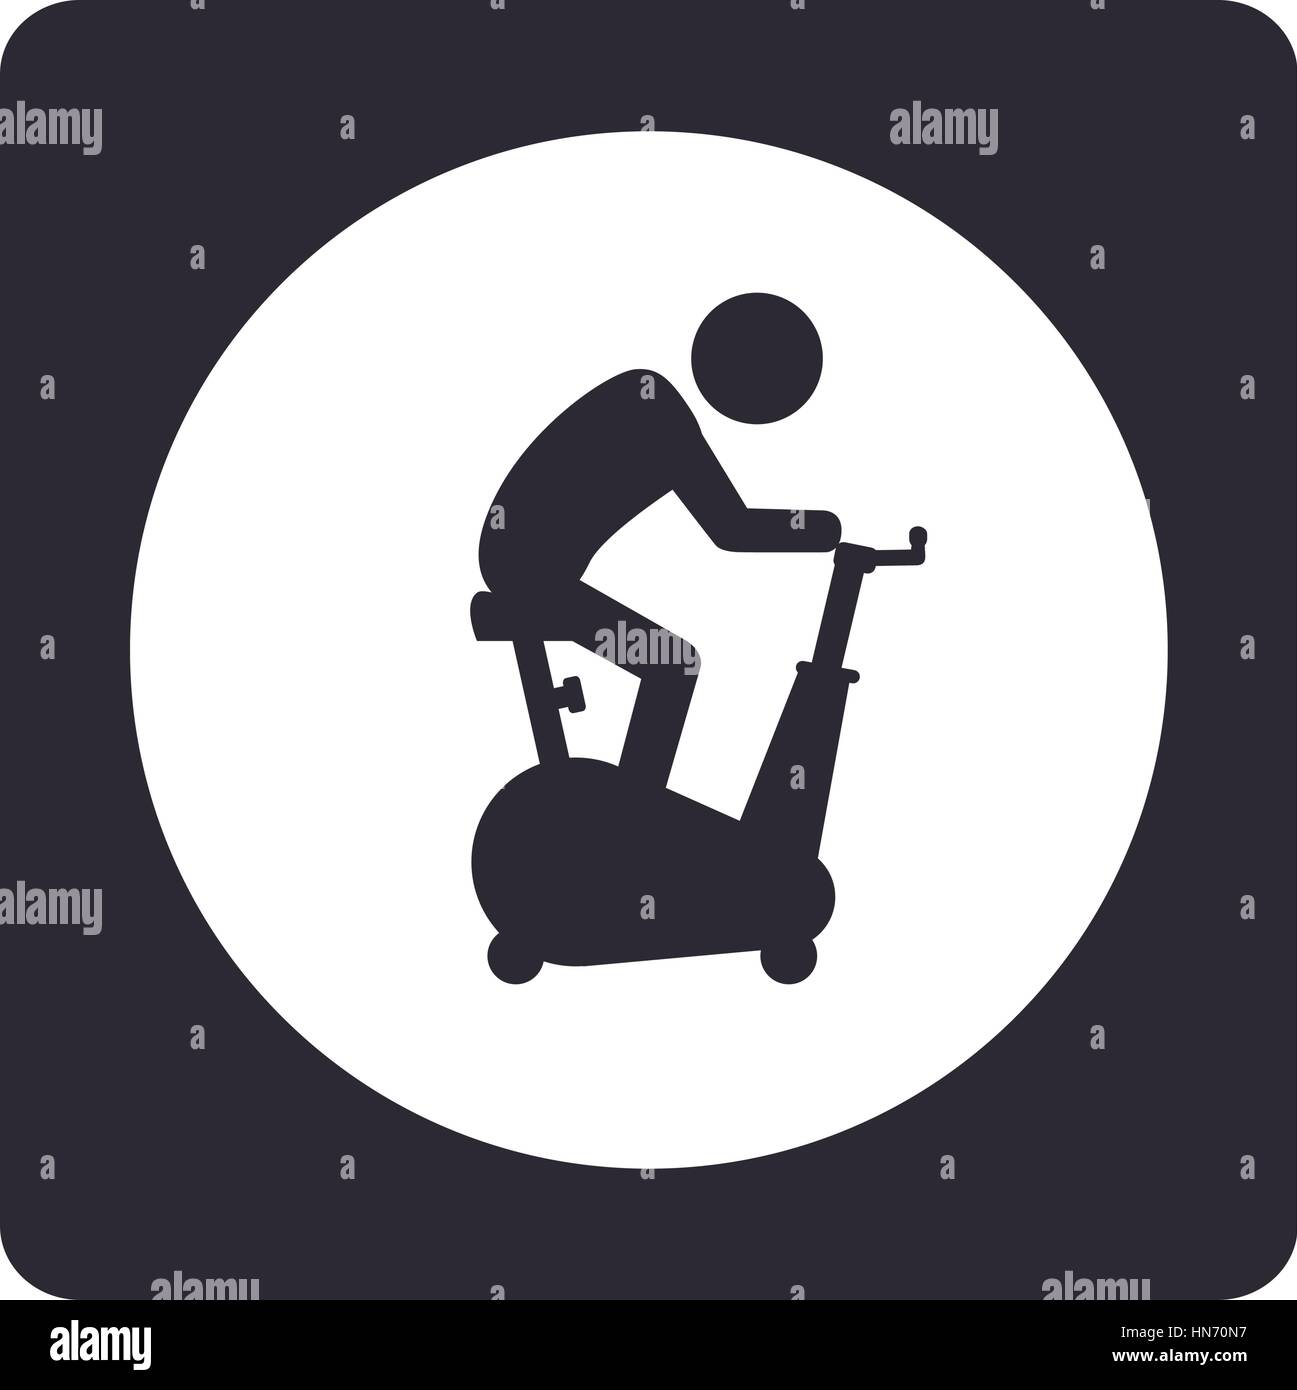 monochrome pictogram with square with circle inside with man in spinning bike vector illustration Stock Vector